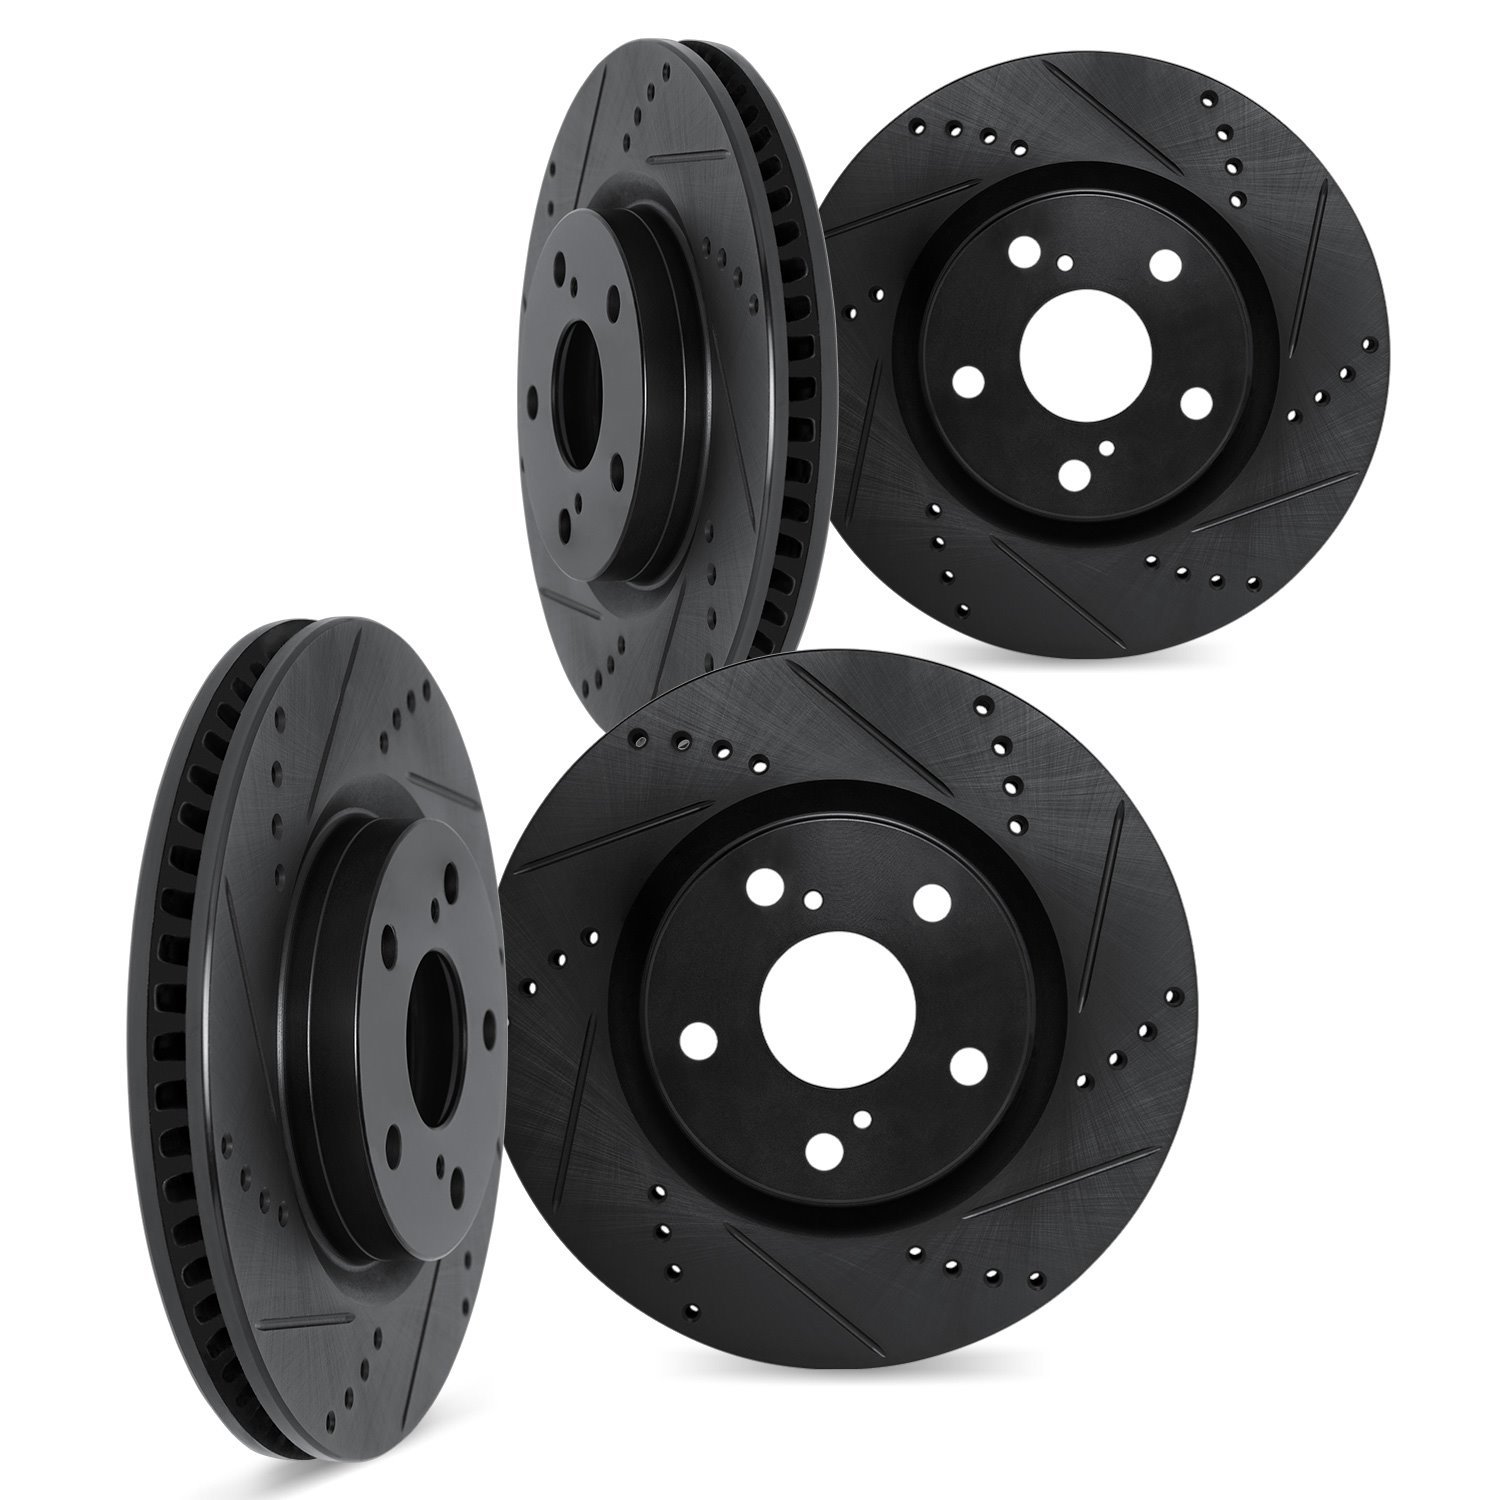 8004-75005 Drilled/Slotted Brake Rotors [Black], 1992-2000 Lexus/Toyota/Scion, Position: Front and Rear